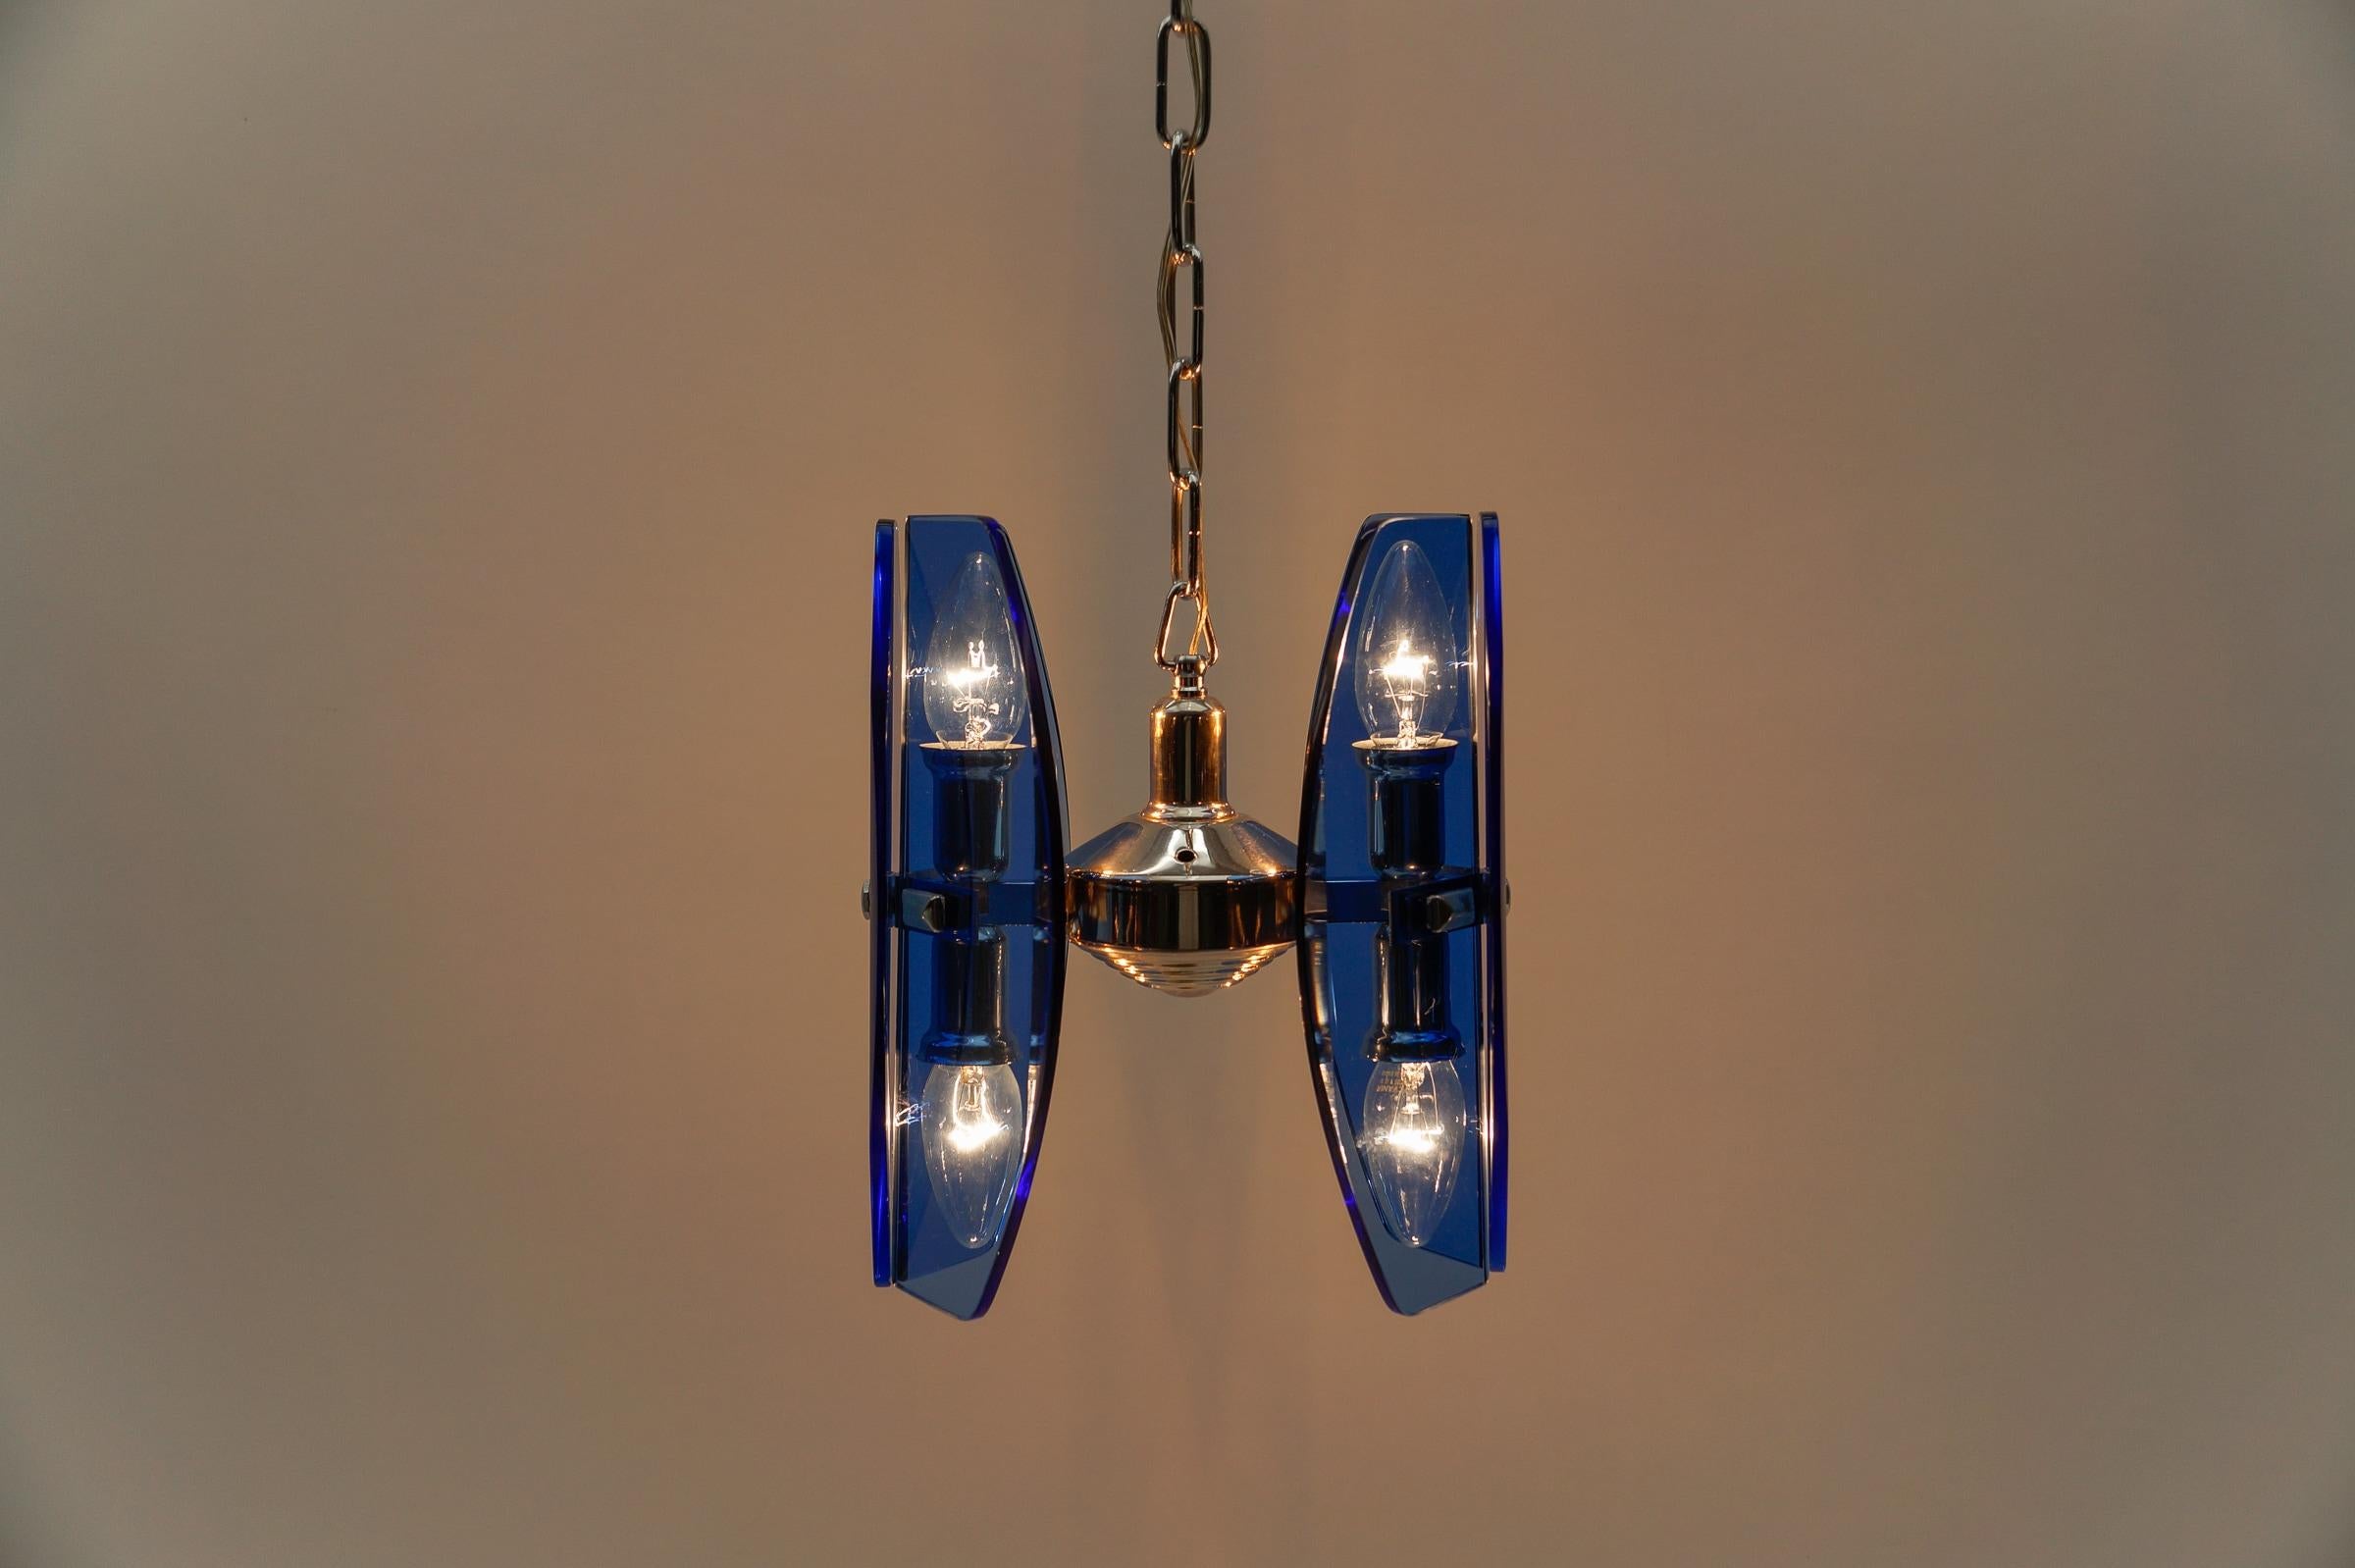 1. of 2 Mid-Century Modern Ceiling Lamp by Antonio Lupi for VECA Italy, 1960s For Sale 3